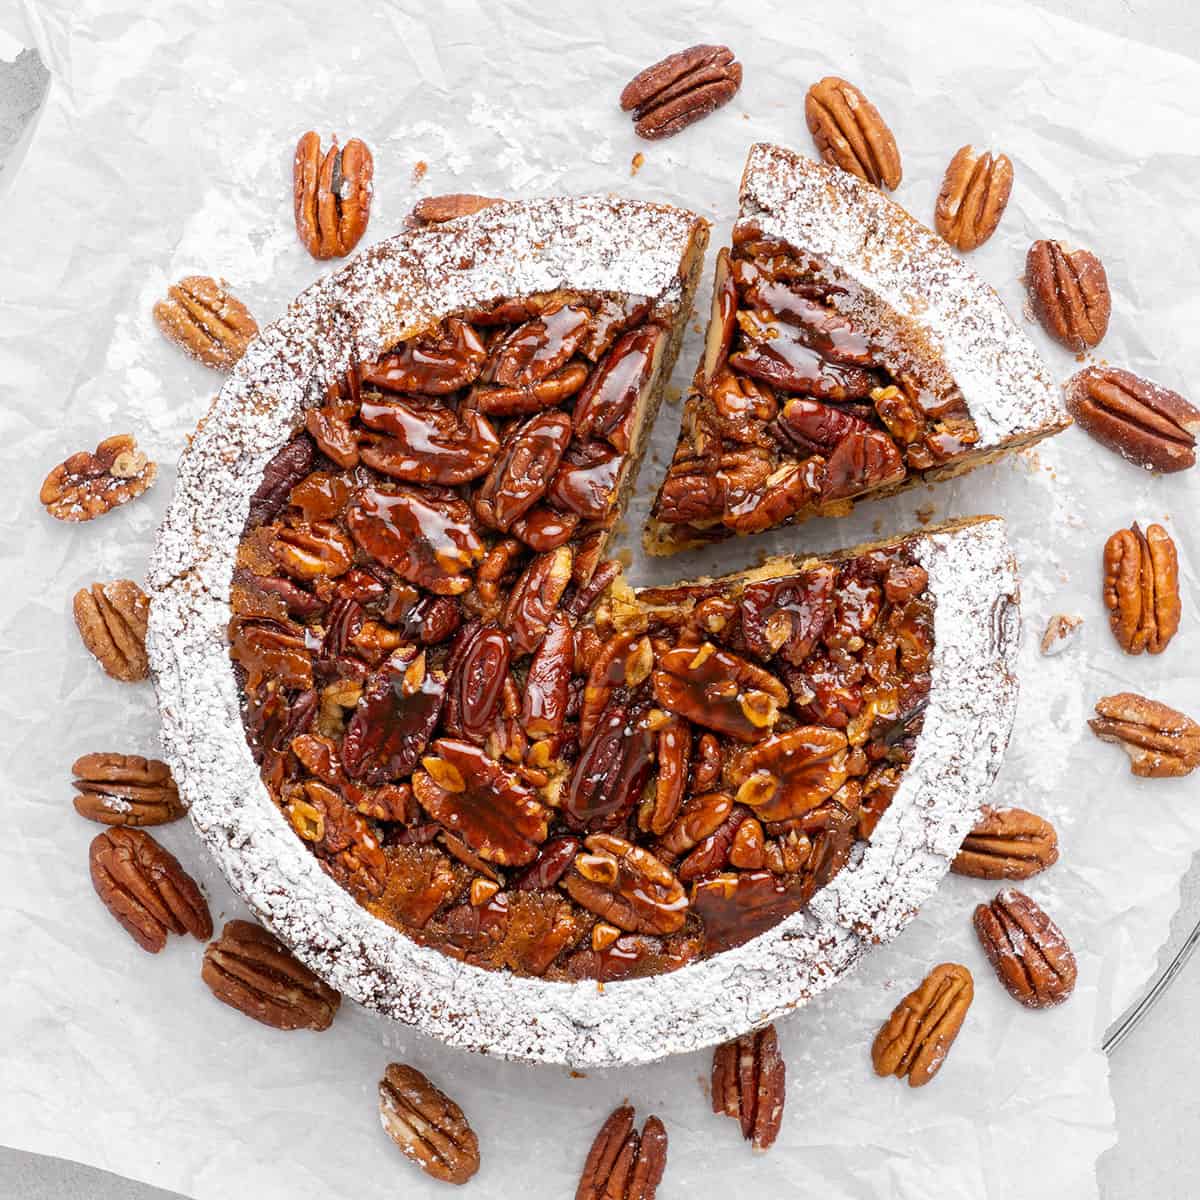 <p>This exceptional <strong><a href="https://www.spatuladesserts.com/pecan-upside-down-cake/">Pecan Upside Down Cake</a></strong> is a perfect dessert for Fall or Thanksgiving; the excellent harmony of moist yogurt cake as the base and caramelised pecan topping! The cake can be made in any pan you have, even in a Bundt pan to turn it into a festive Pecan Upside Down Bundt cake for Thanksgiving!</p> <p><strong>Go to the recipe: <a href="https://www.spatuladesserts.com/pecan-upside-down-cake/">Pecan Upside Down Cake</a></strong></p>